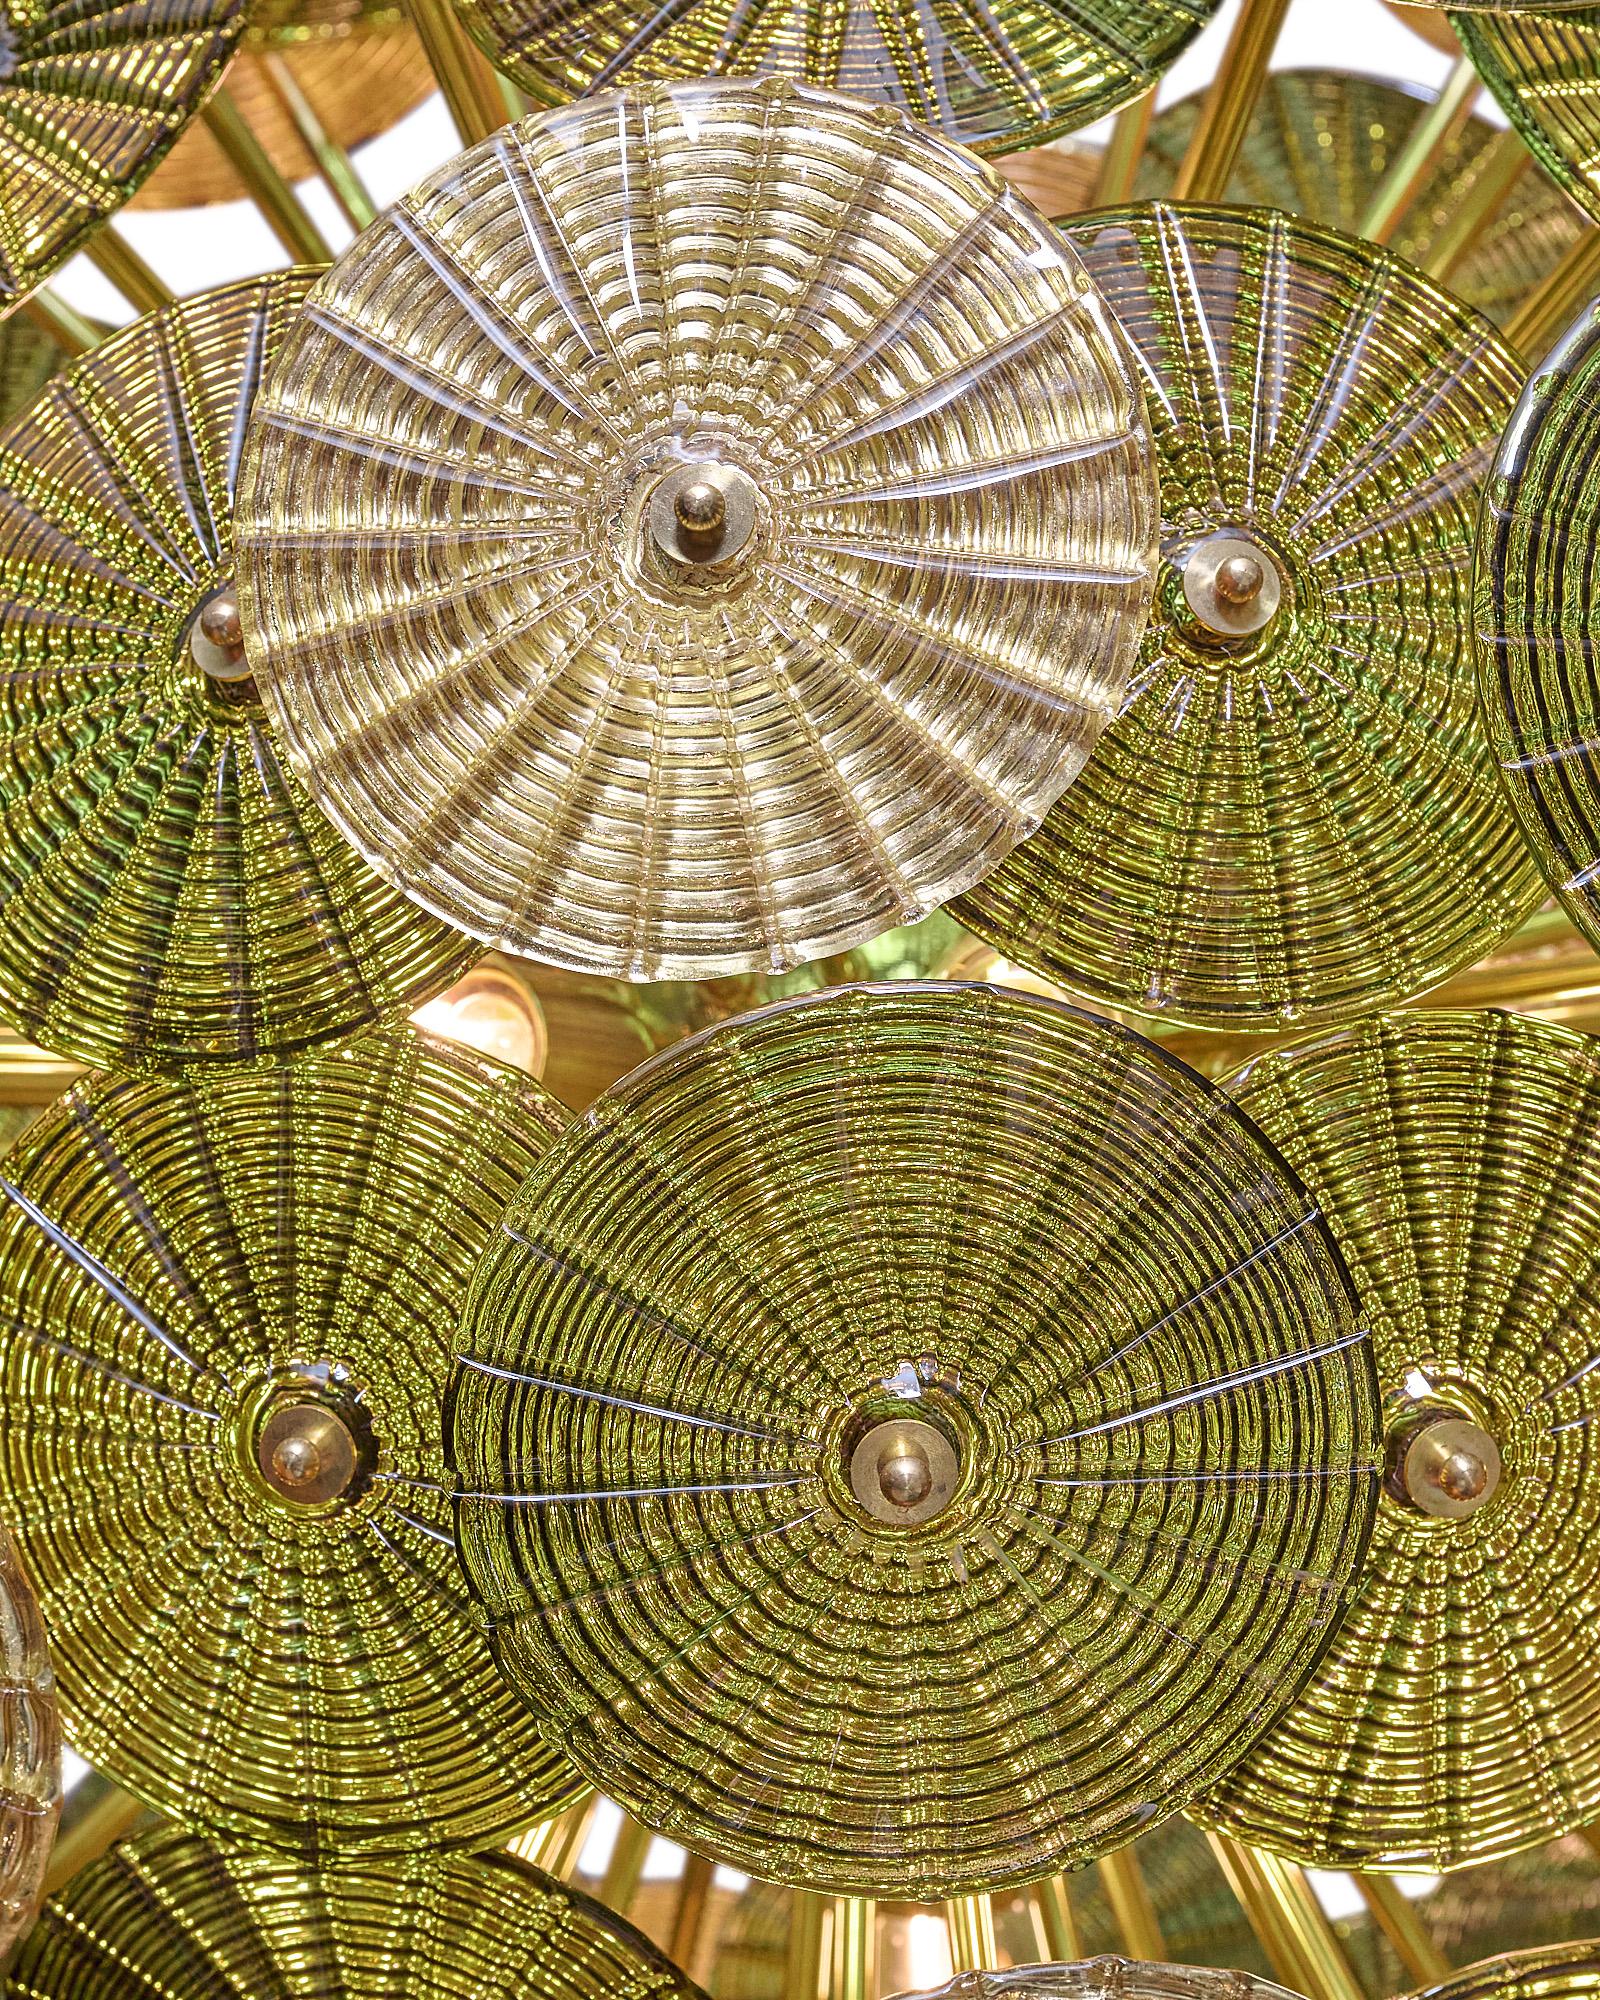 An Italian Murano glass sputnik chandelier with gold and green glass elements. This fixture has layered circular glass pieces; each hand-blown using the “stampato” technique. They alternate between a striking olive green and a gold leafed finish. We